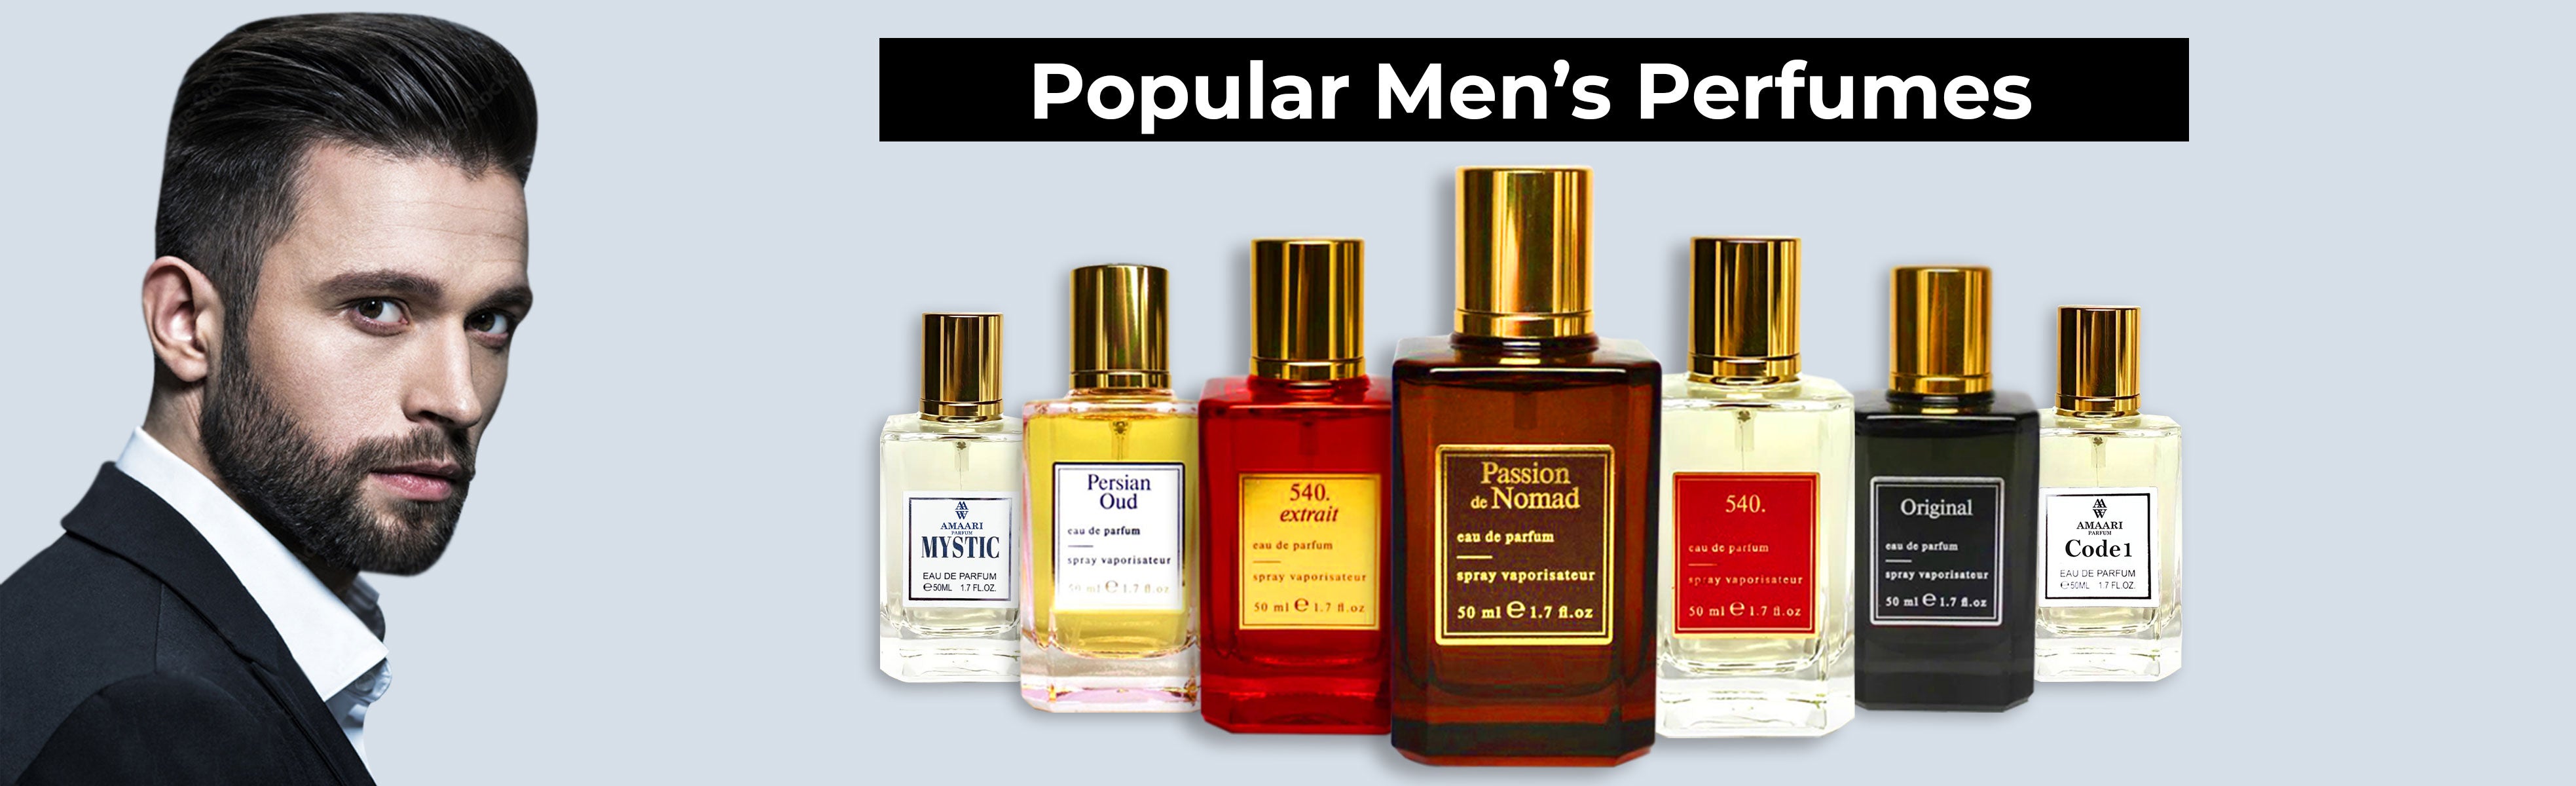 which perfume is best for men